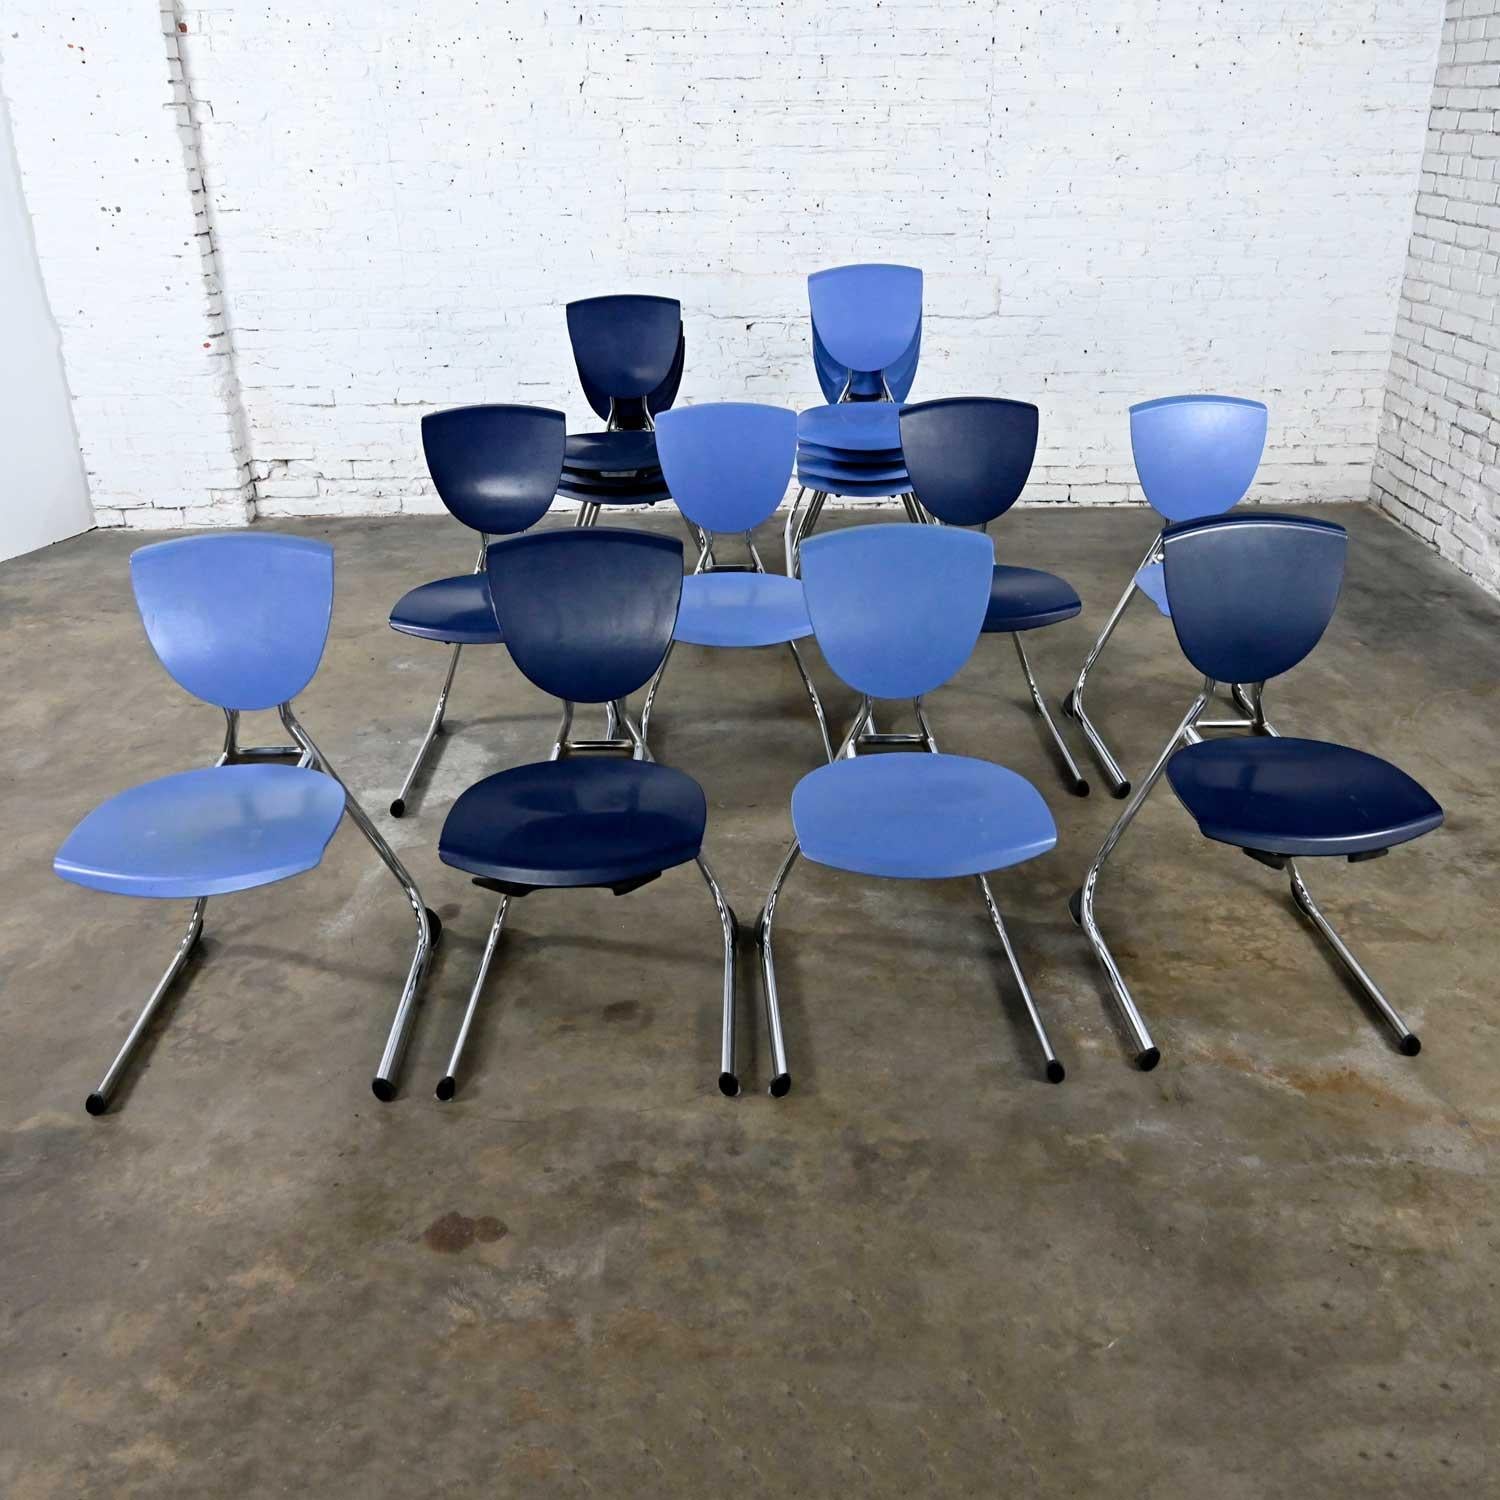 15 KI Krueger International Modern Blue Plastic & Chrome Stacking Dining Chairs In Good Condition For Sale In Topeka, KS